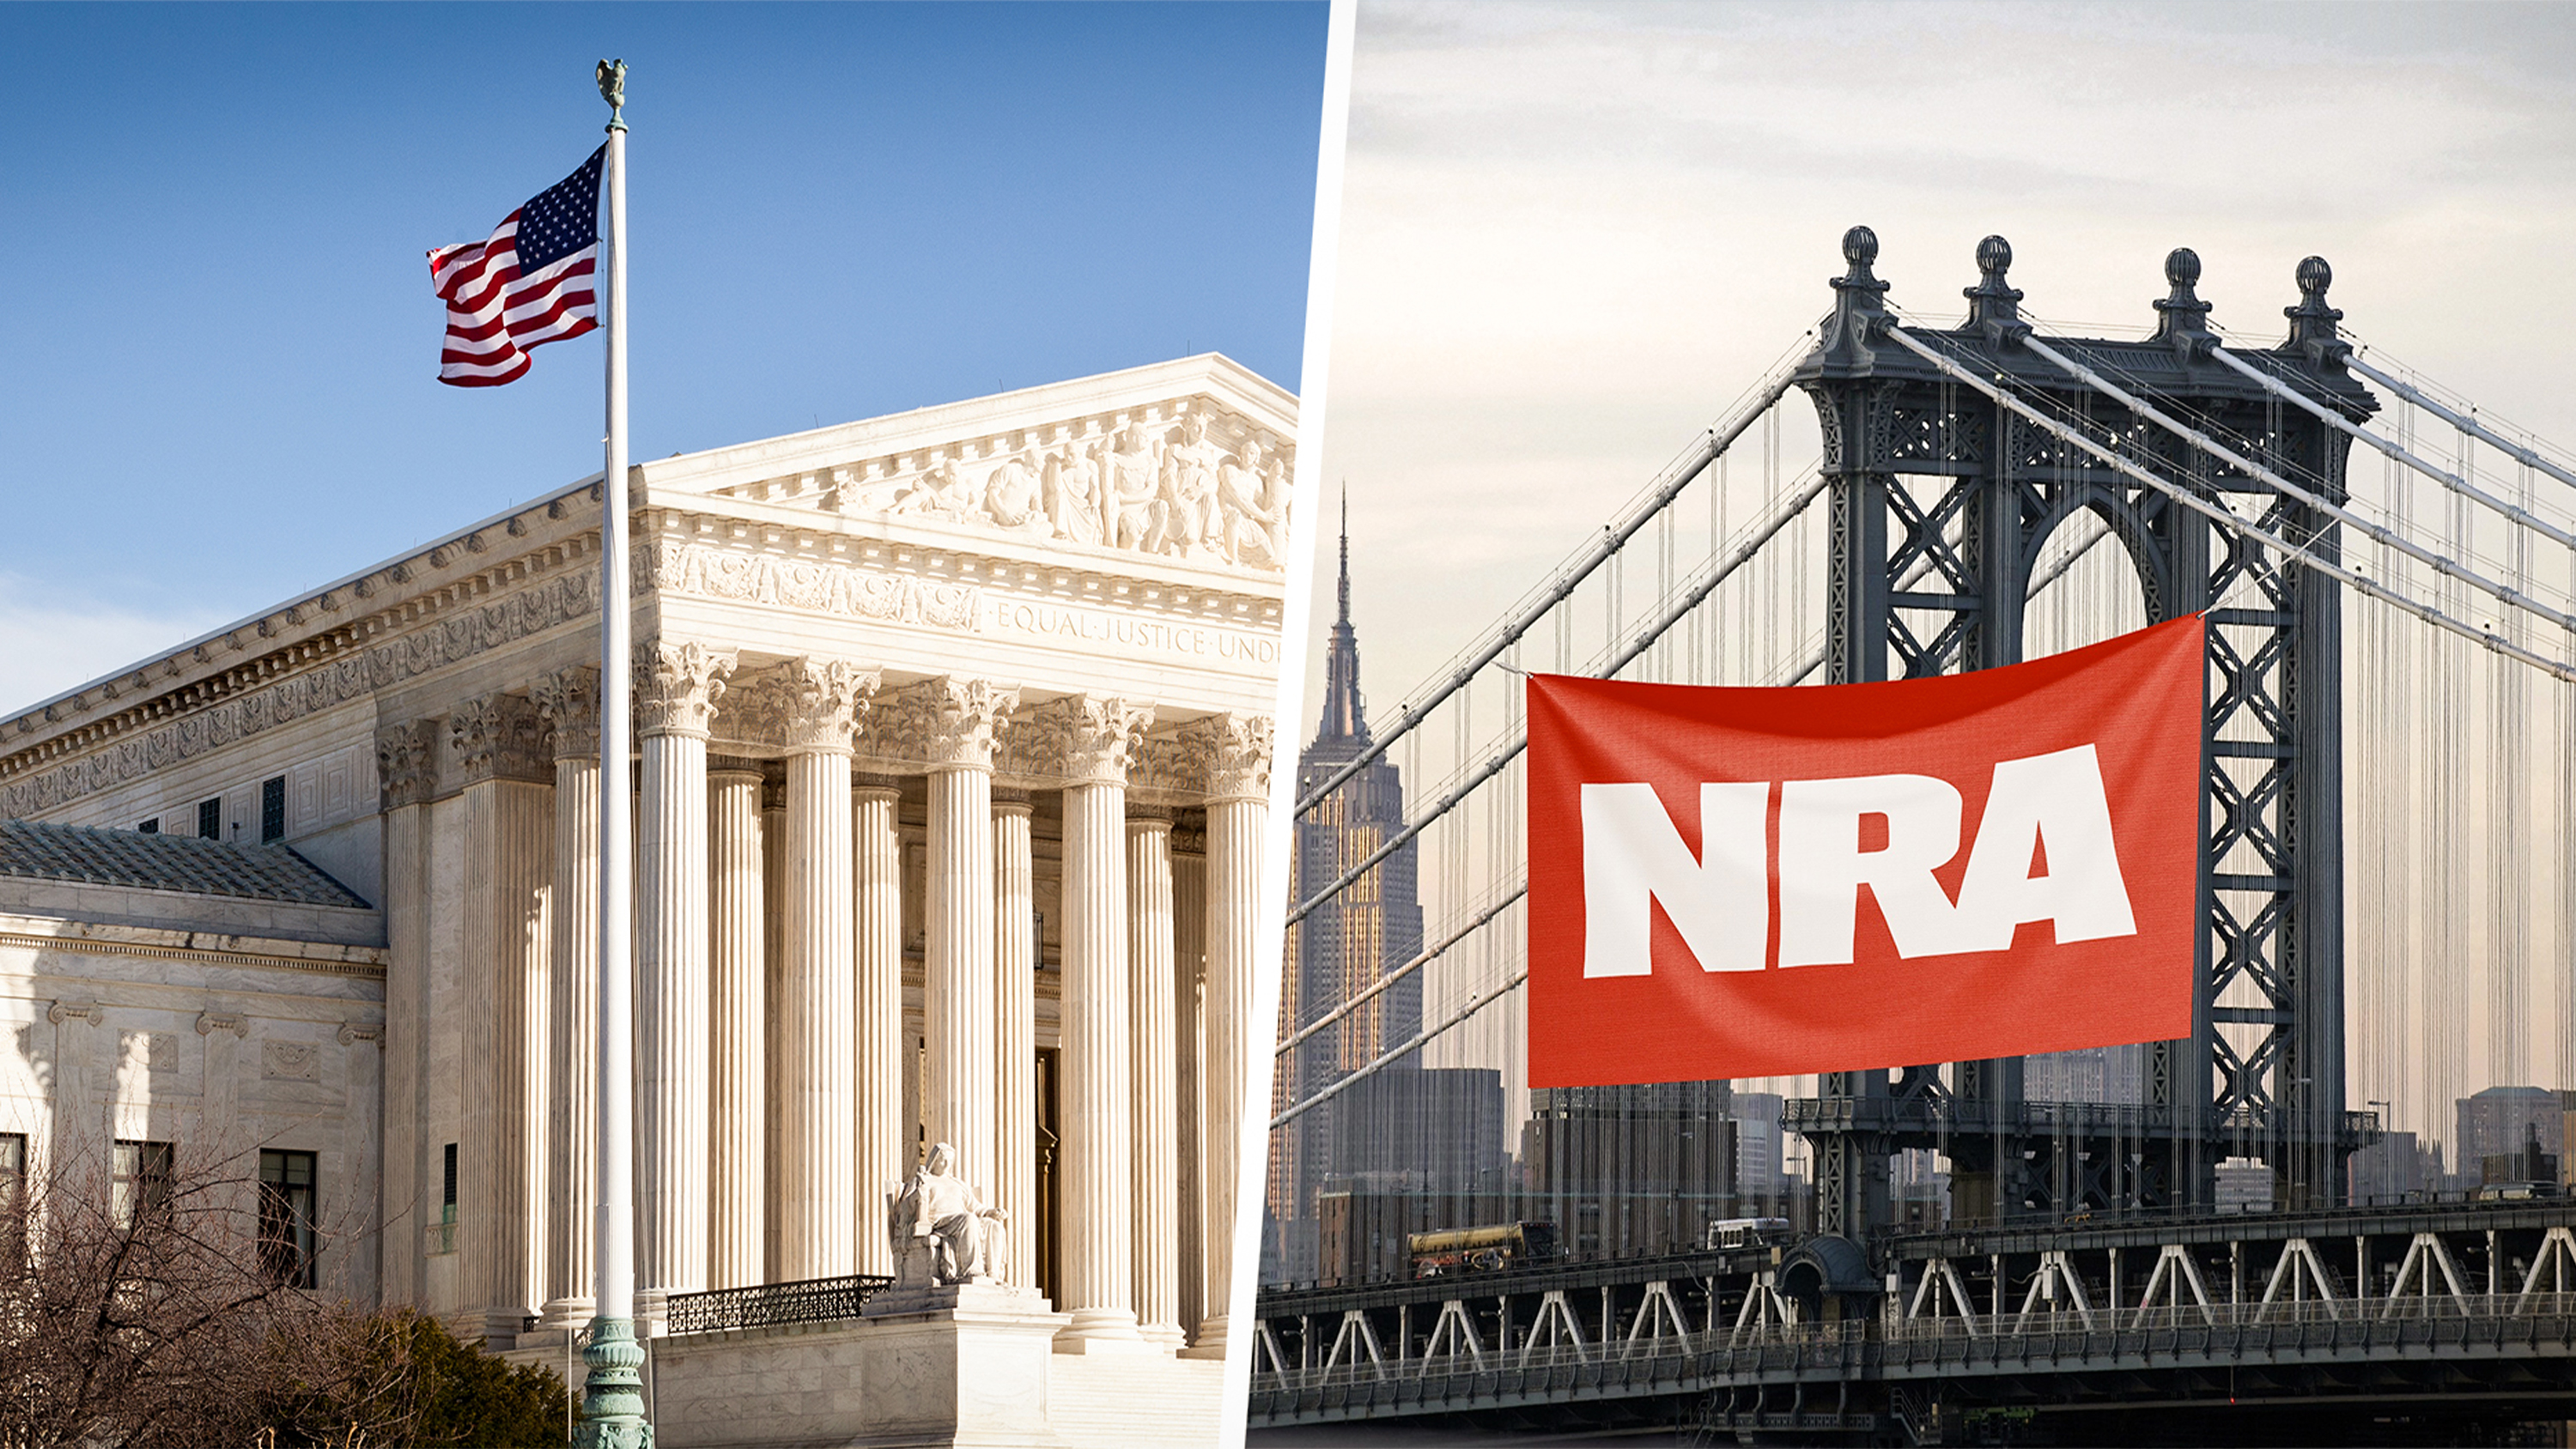 Supreme Court Accepts NRA First Amendment Case – A “Historic Step Forward” for the NRA and Free Speech